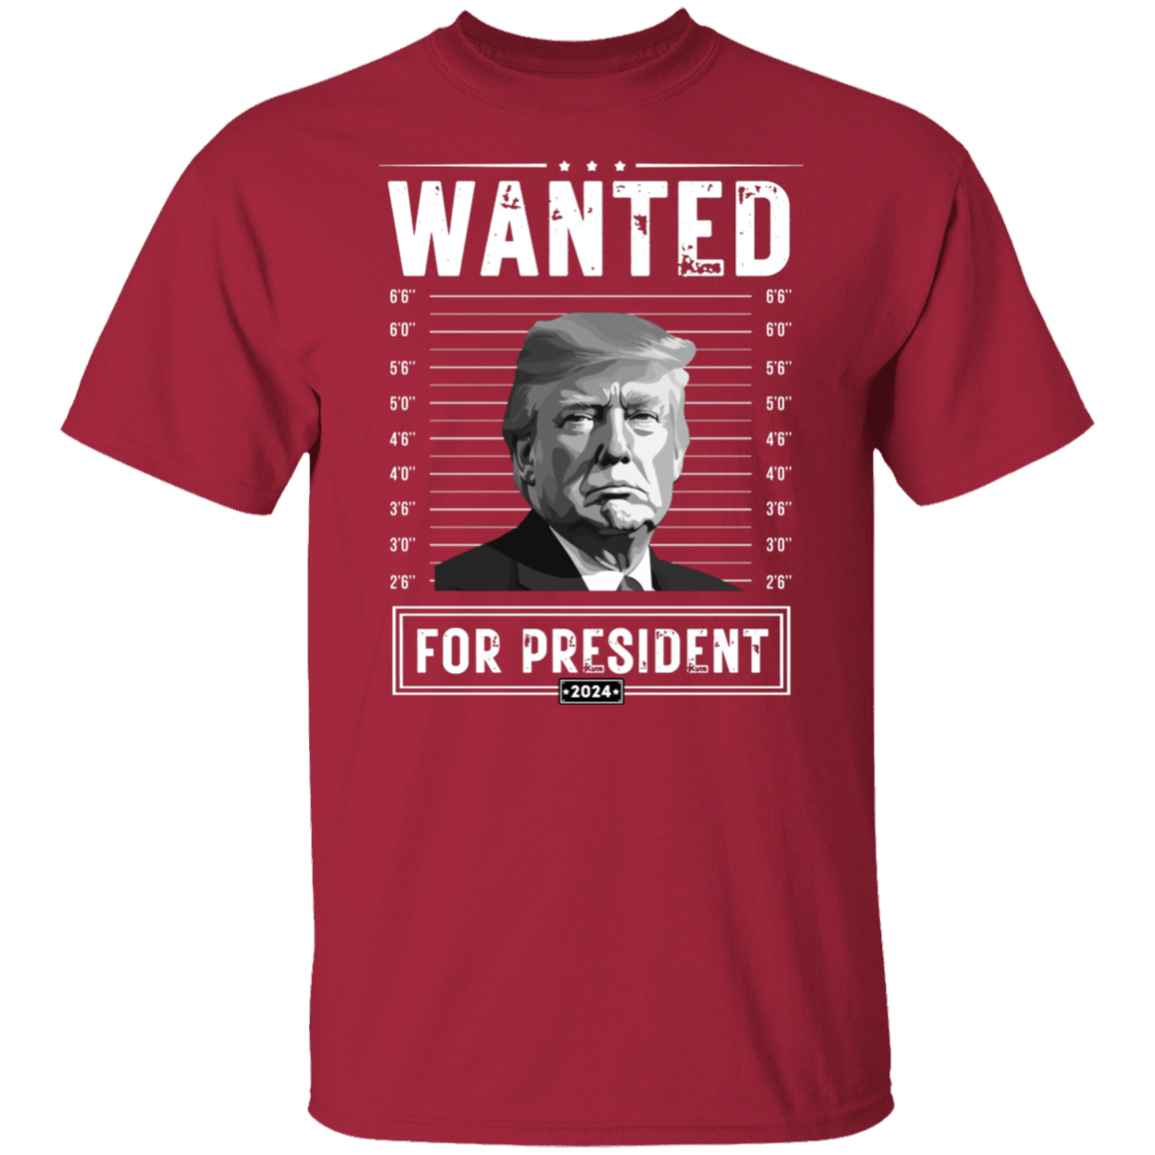 Wanted For President T-Shirt